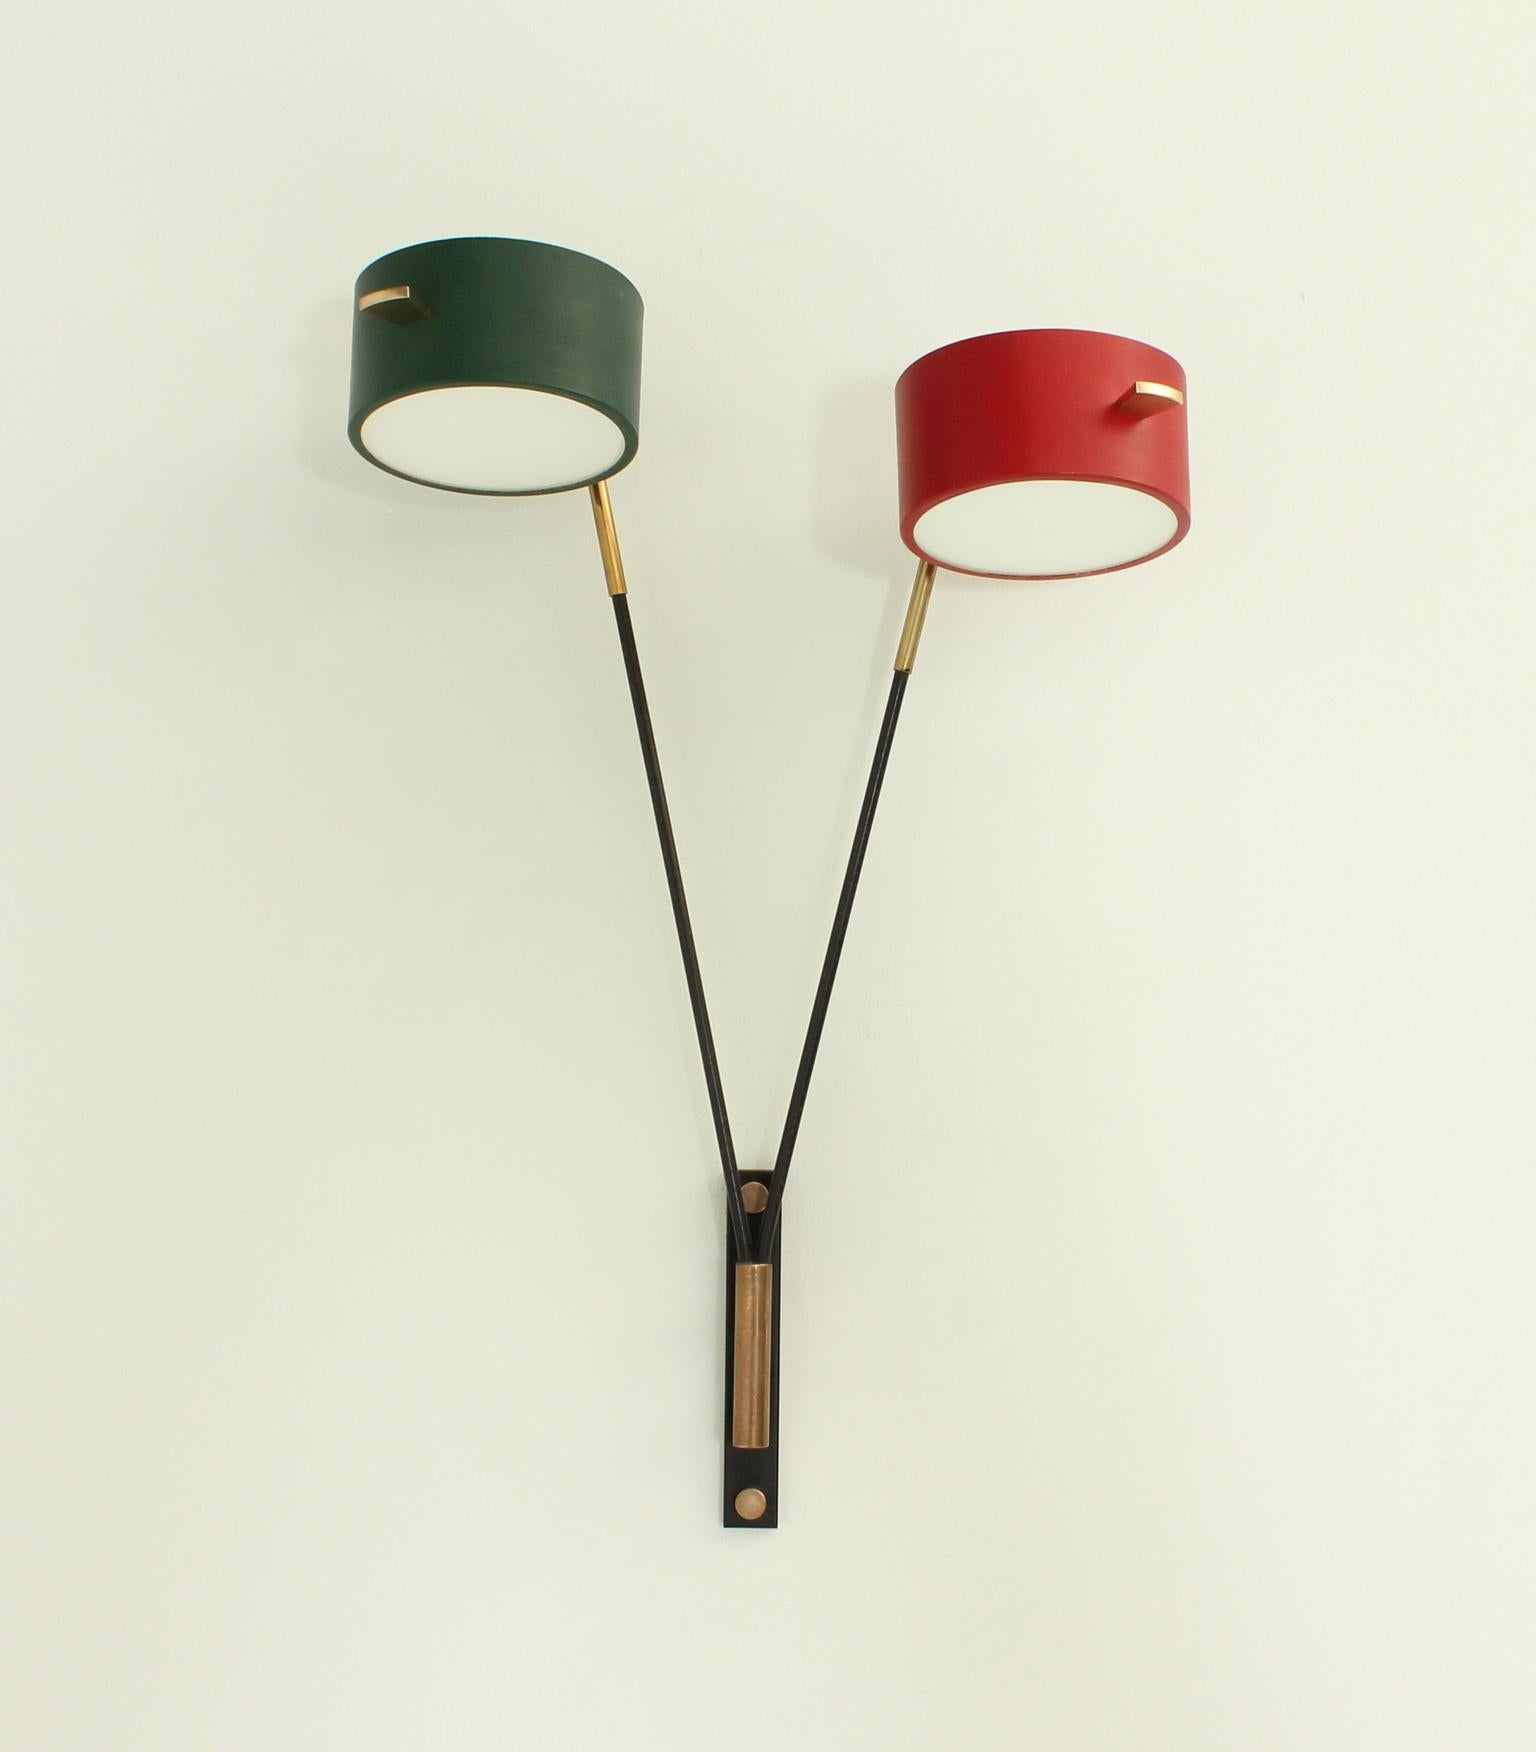 Large sconce by Maison Lunel, France, 1950's. Adjustable shades with moveble kneecap and fixed arms. Lacquered metal, brass and white opal glass.